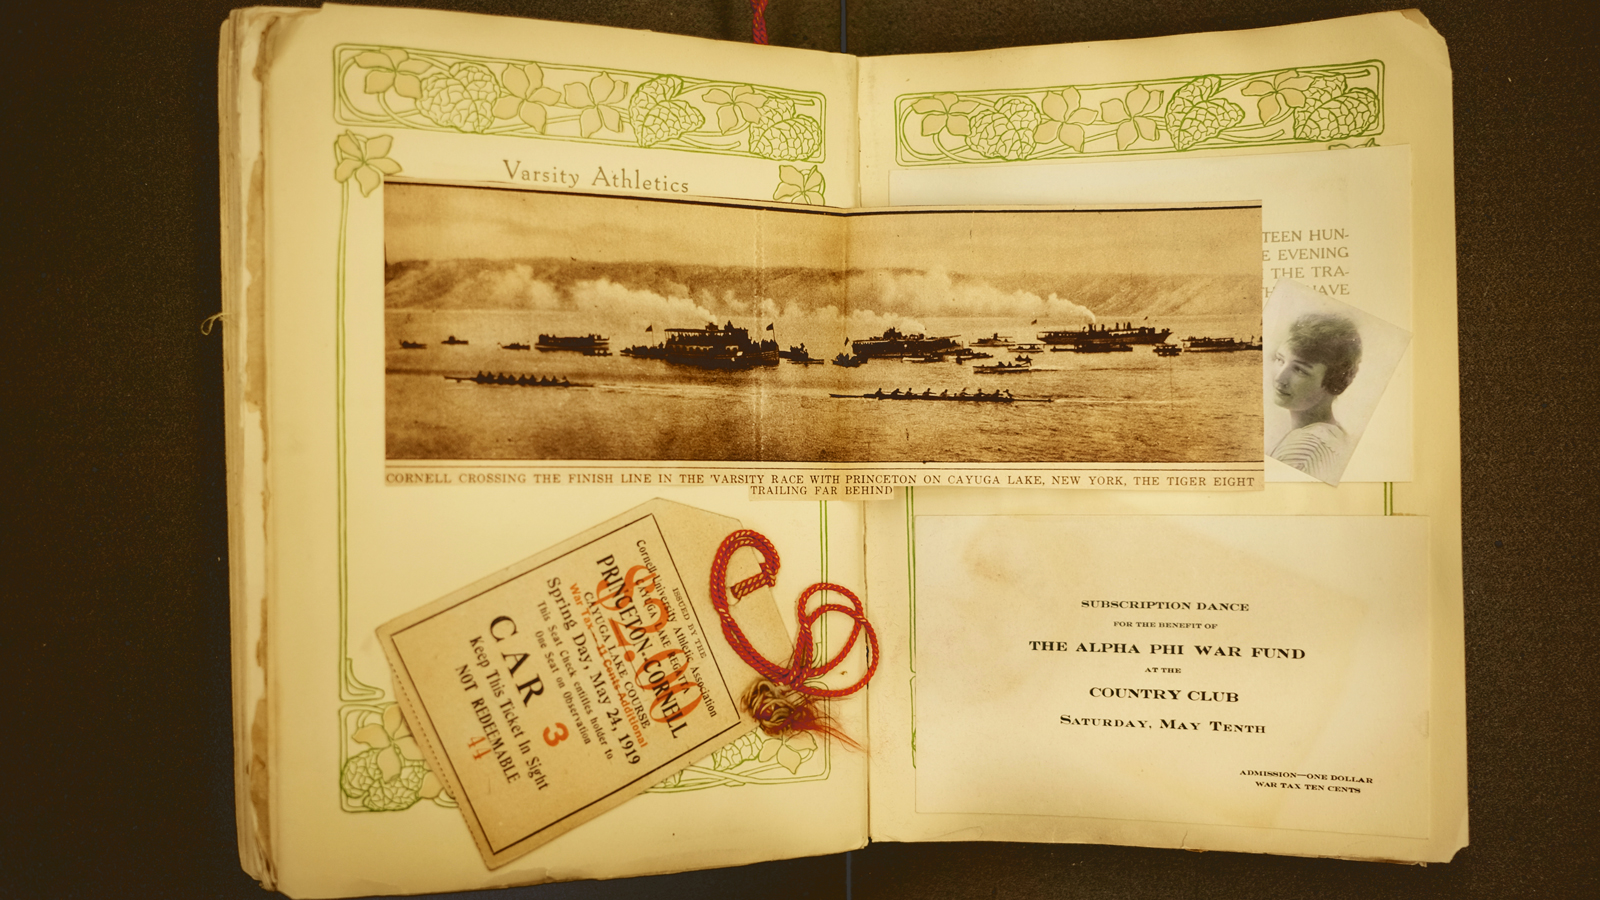 A newspaper photo from a victorious crew race against Princeton, and a ticket from the observation train, from a 1919 scrapbook